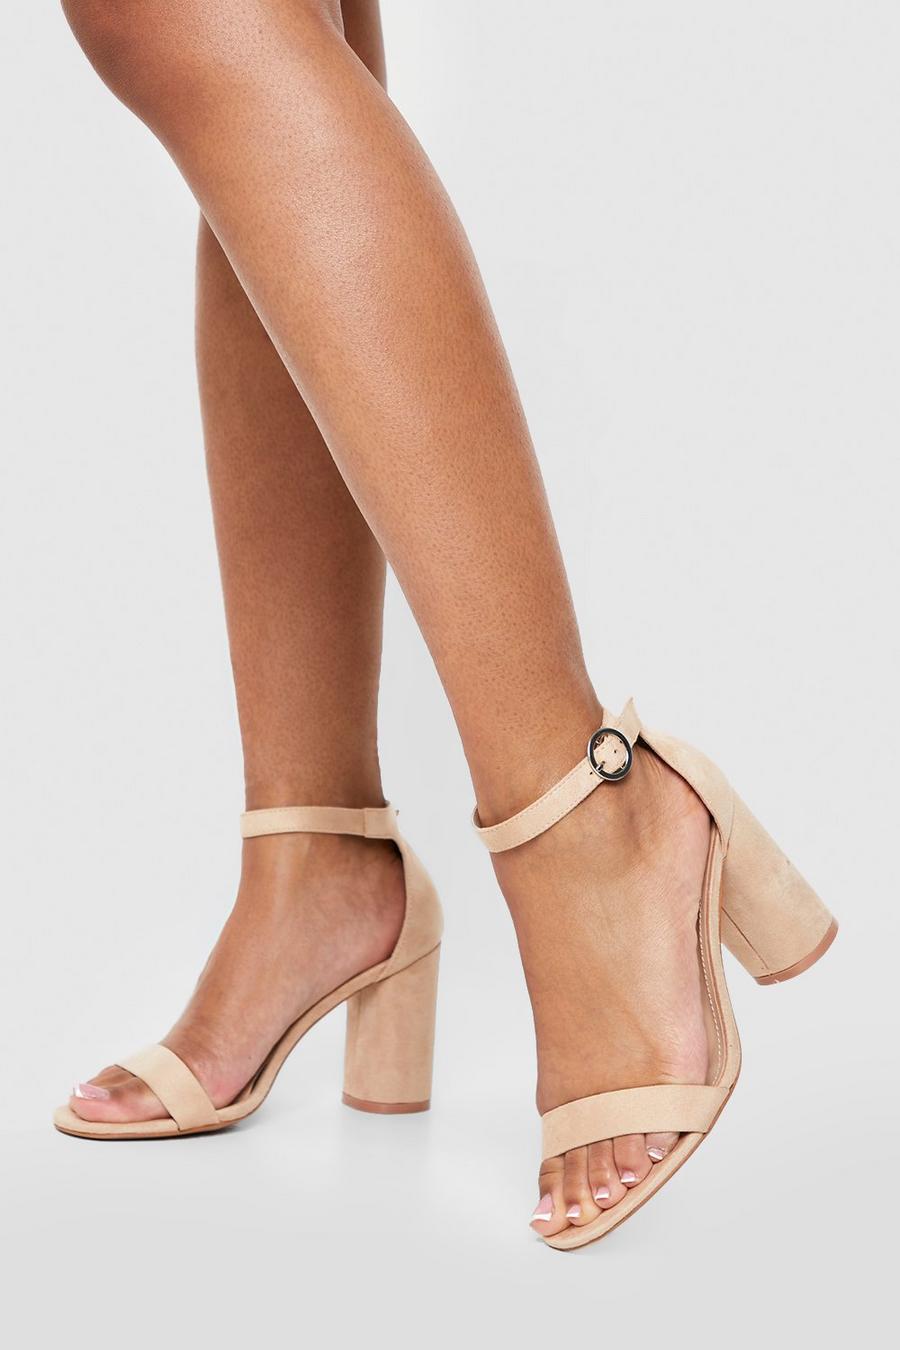 Nude Wide Width Rounded Heel 2 Part Barely There Heels